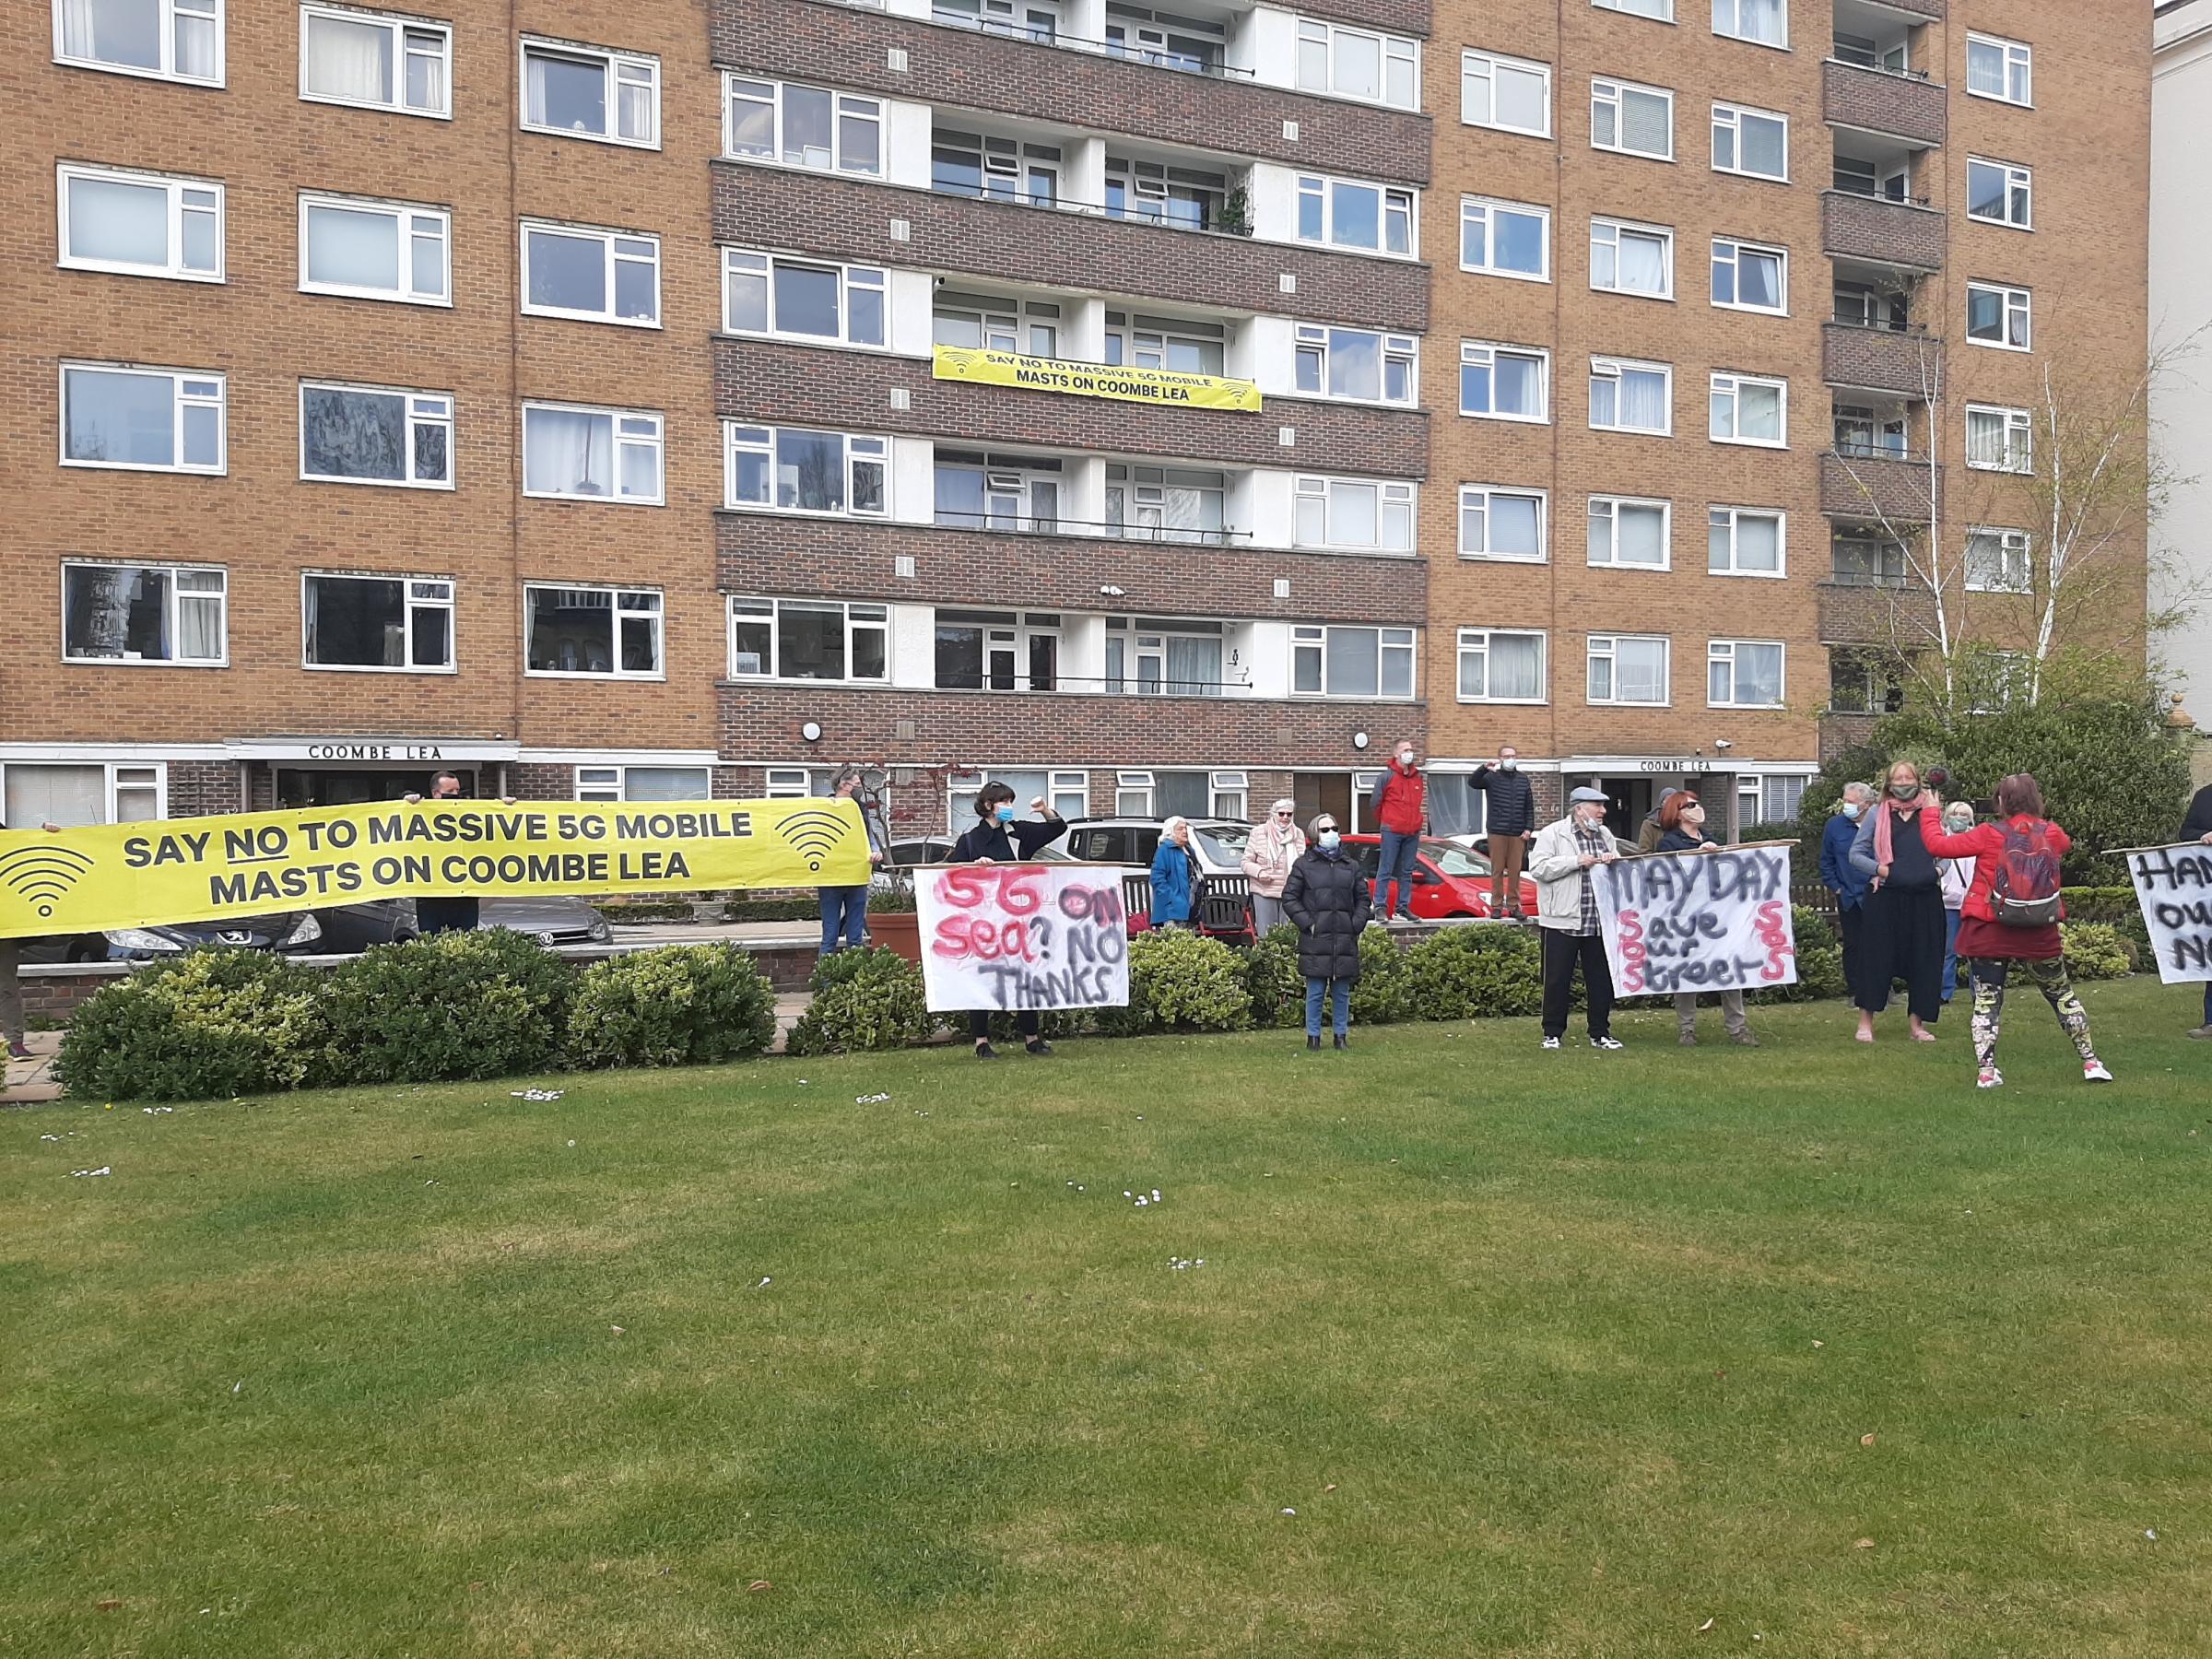 Protesters are angry about plans for six 5G mobile phone masts to be installed on top of the Coombe Lea block of flats in Grand Avenue, Hove